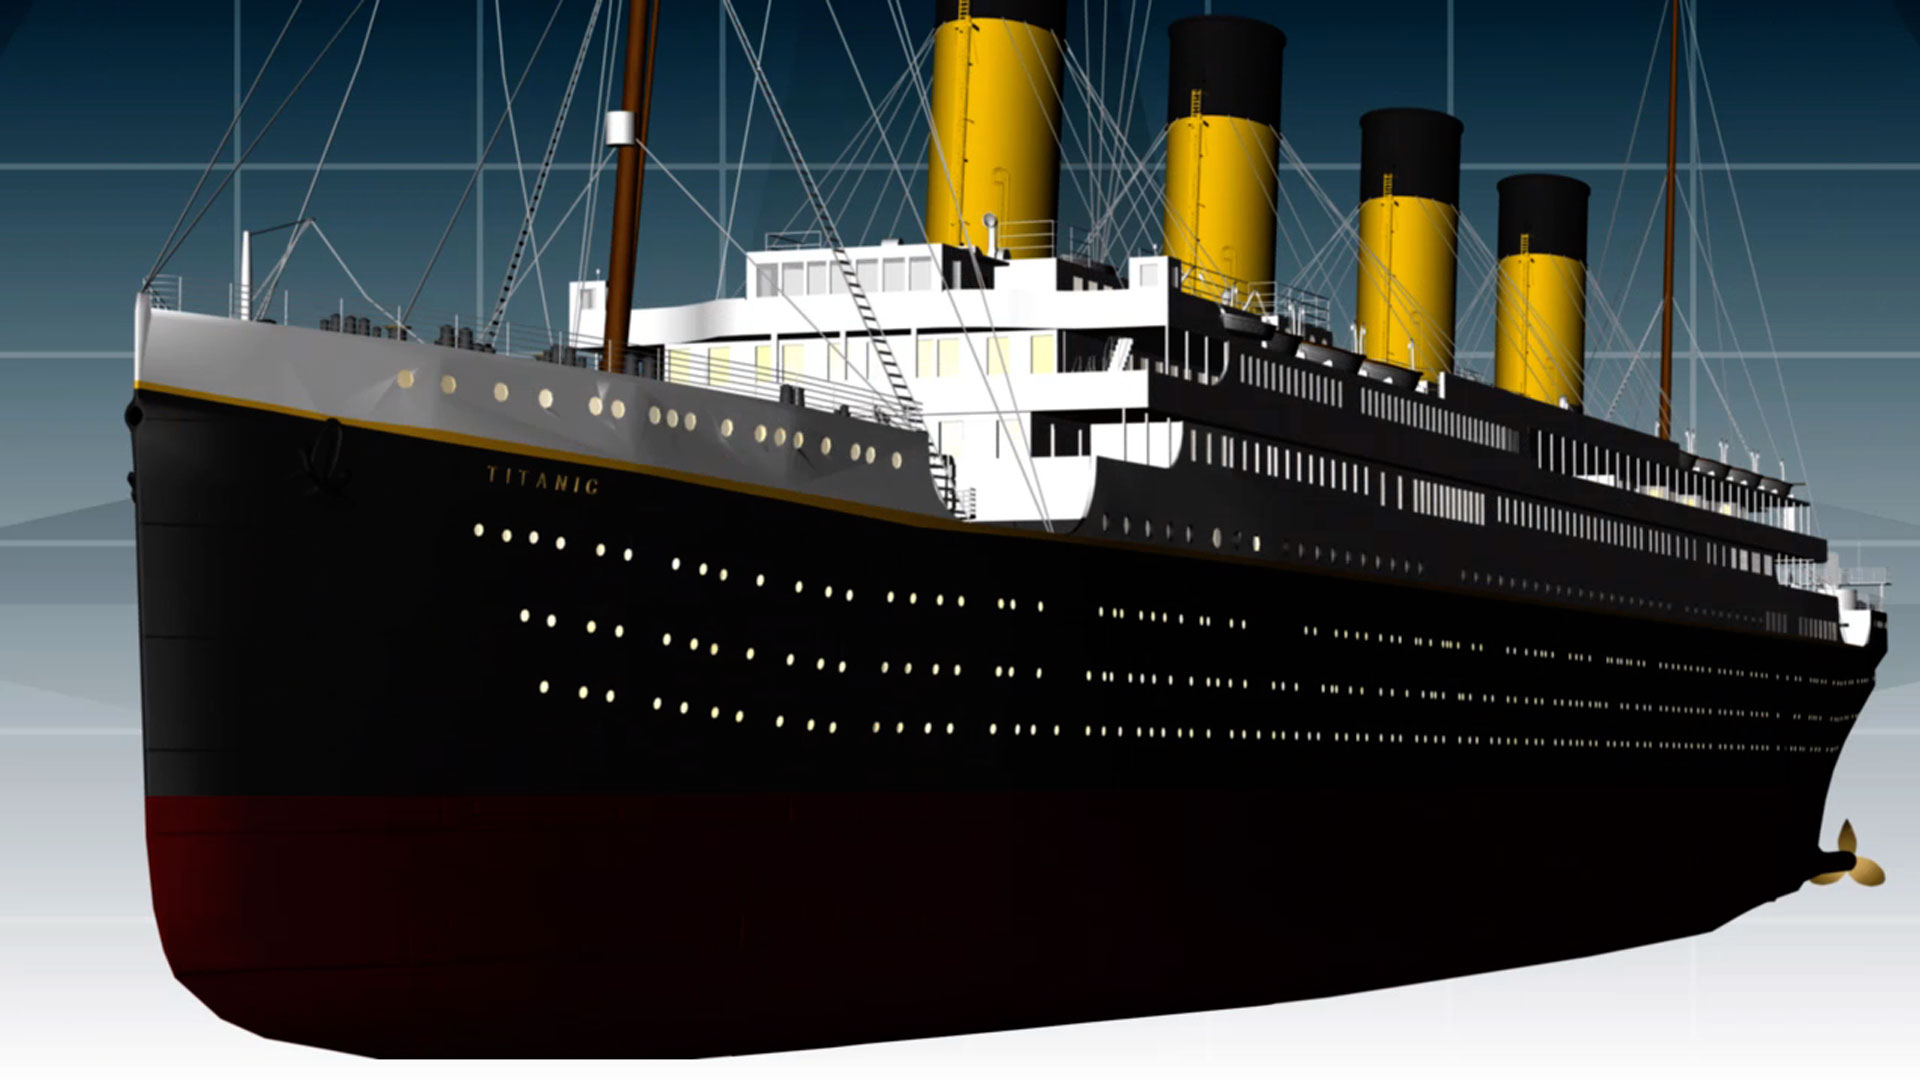 Titanic news: Inside the lavish RMS ship which sank in 1912 - see pictures, Travel News, Travel